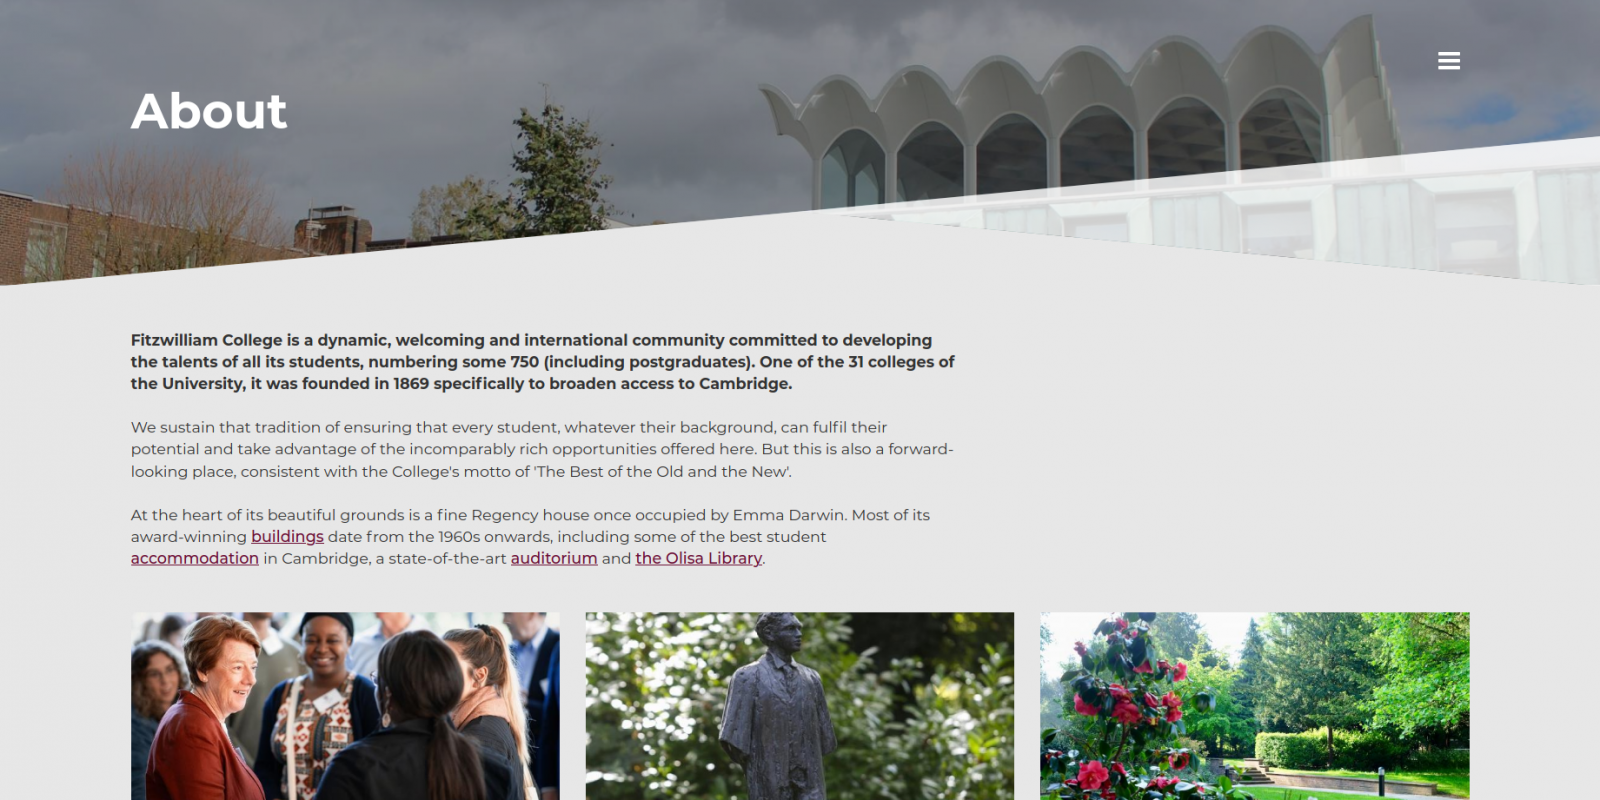 Fitzwilliam College, University of Cambridge - website about page